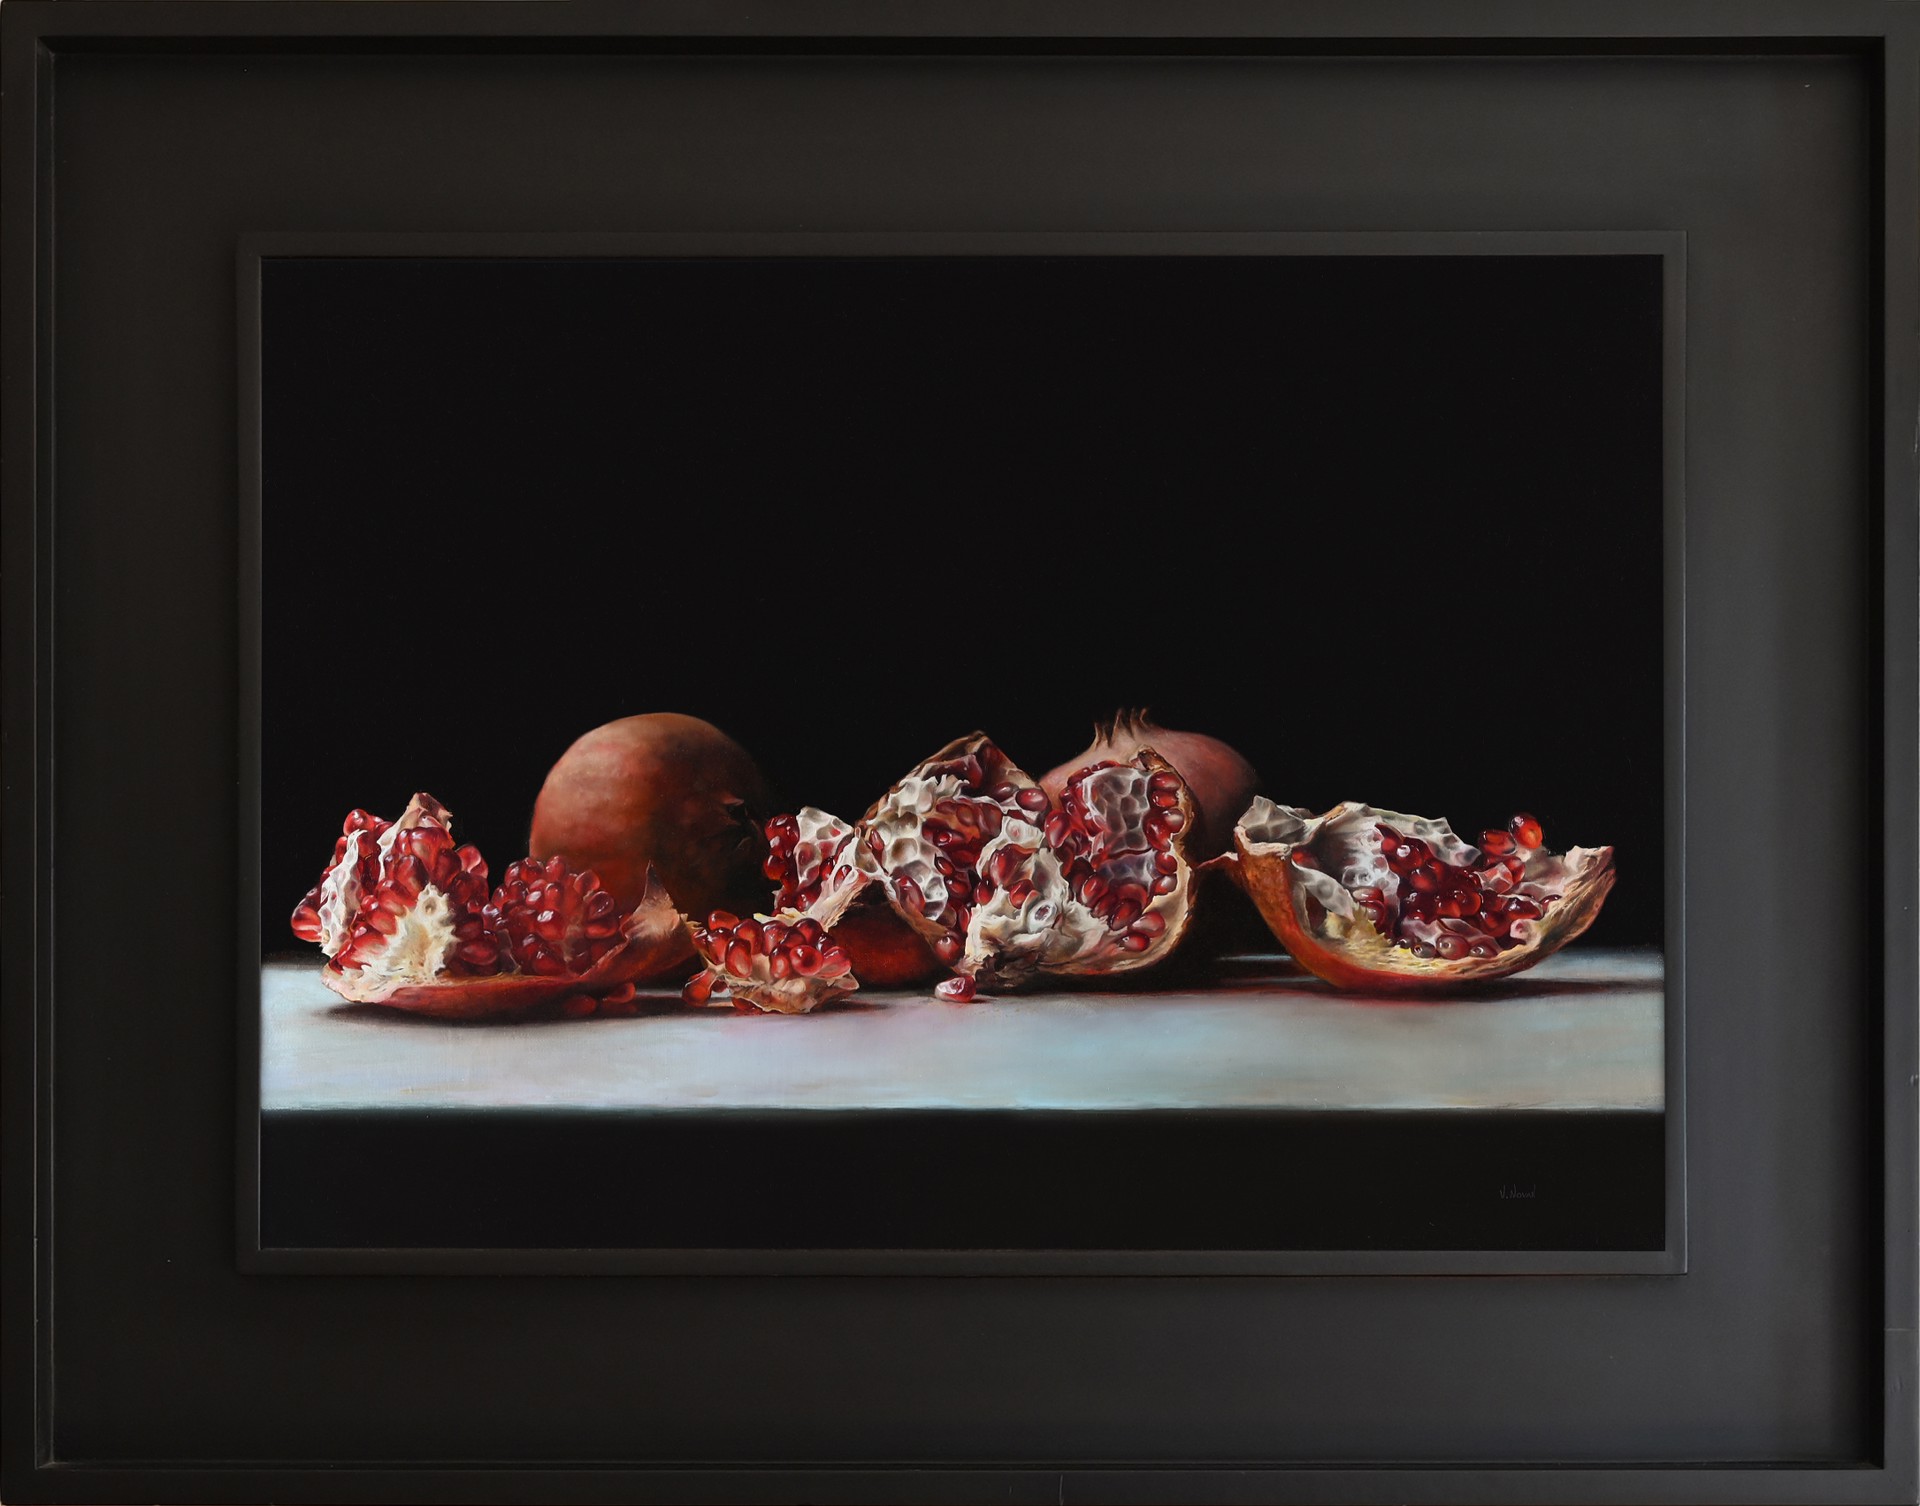 Photorealistic oil painting "Broken Hearts" by Victoria Novak, depicting several broken pomegranates on a white surface against a black background, showcasing the vibrant red arils and intricate textures.